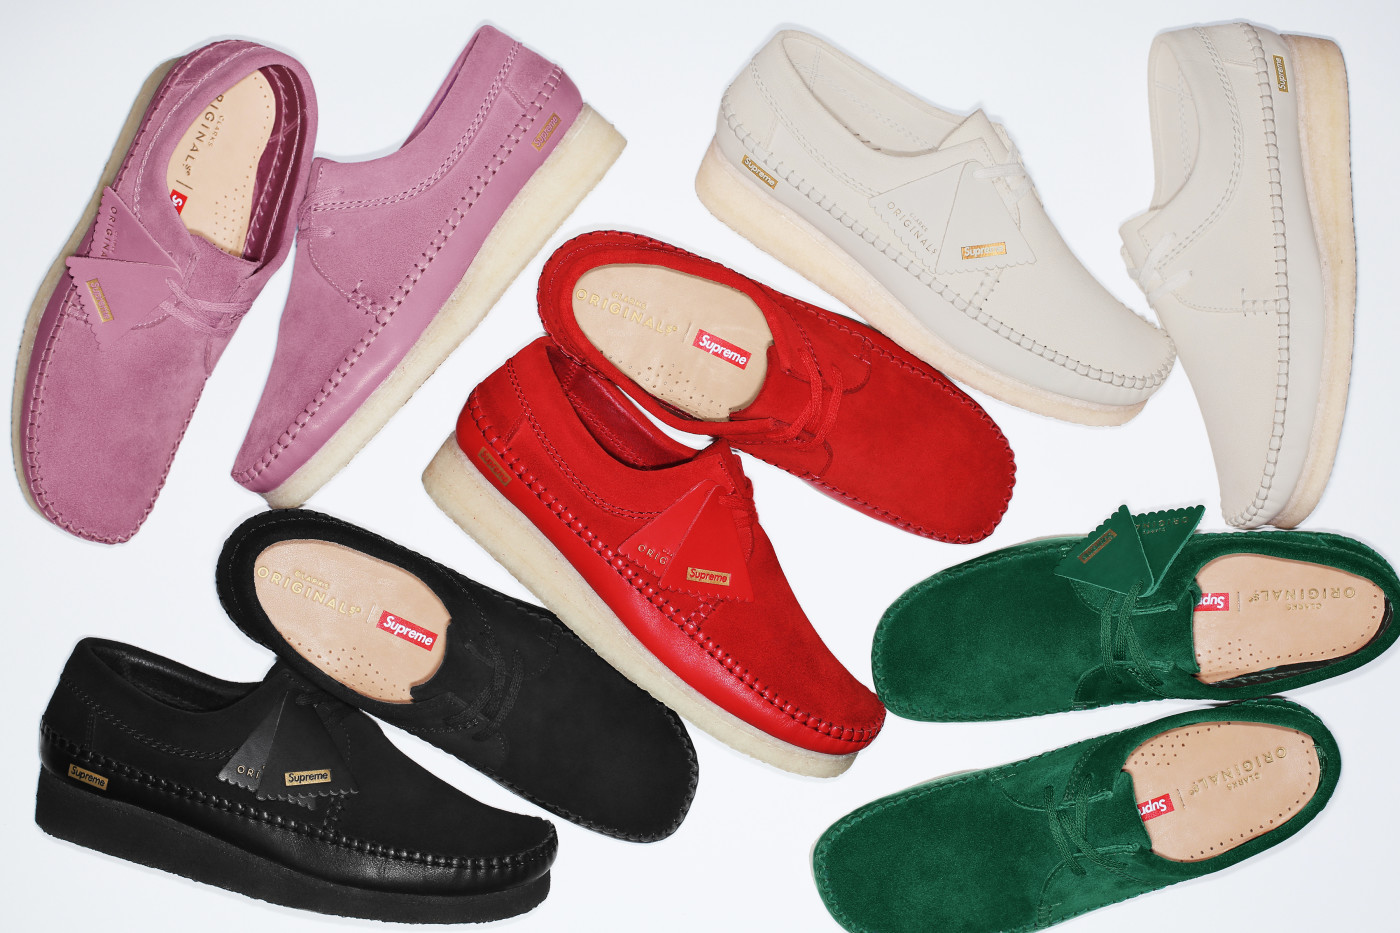 Clarks Originals Taps Supreme for Five Fresh Takes on the Weaver